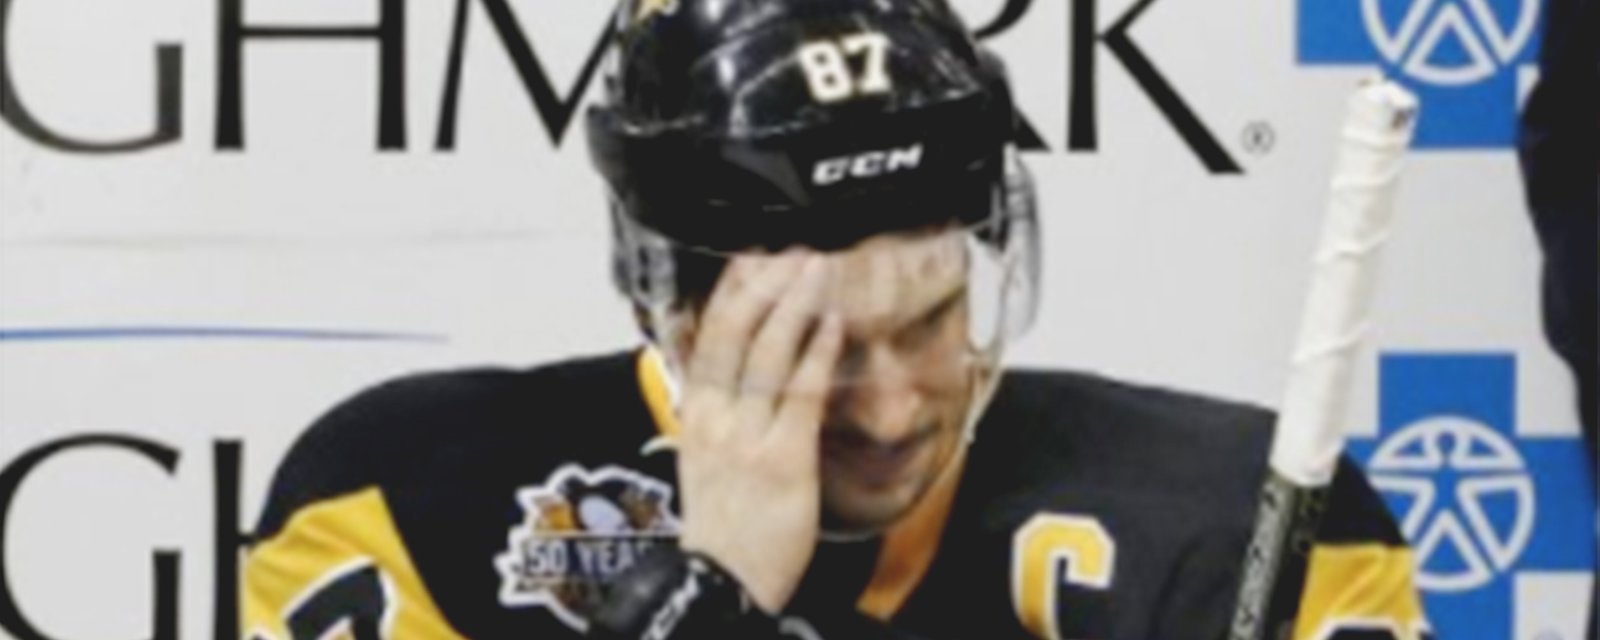 CONTROVERSY arises around Sidney Crosby’s concussion following game 6.